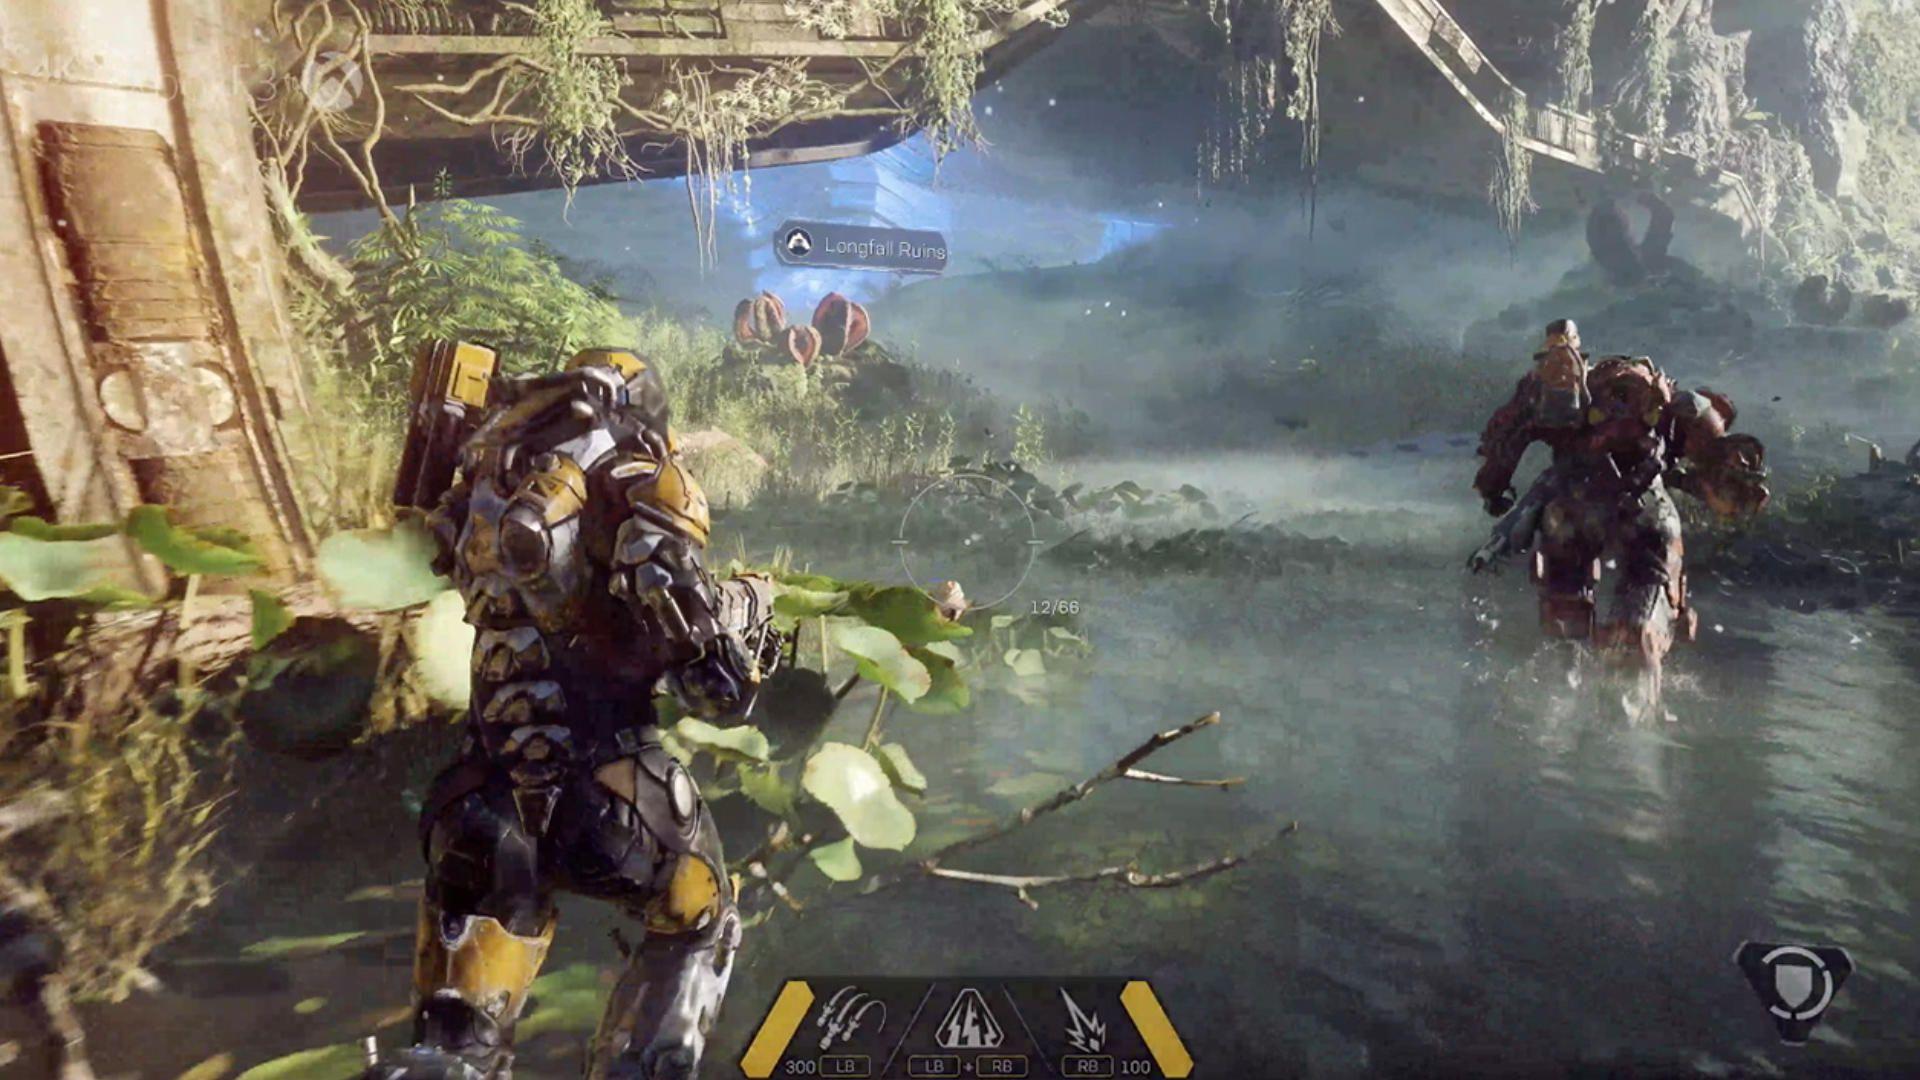 Anthem HD Wallpaper. Background games review, play online